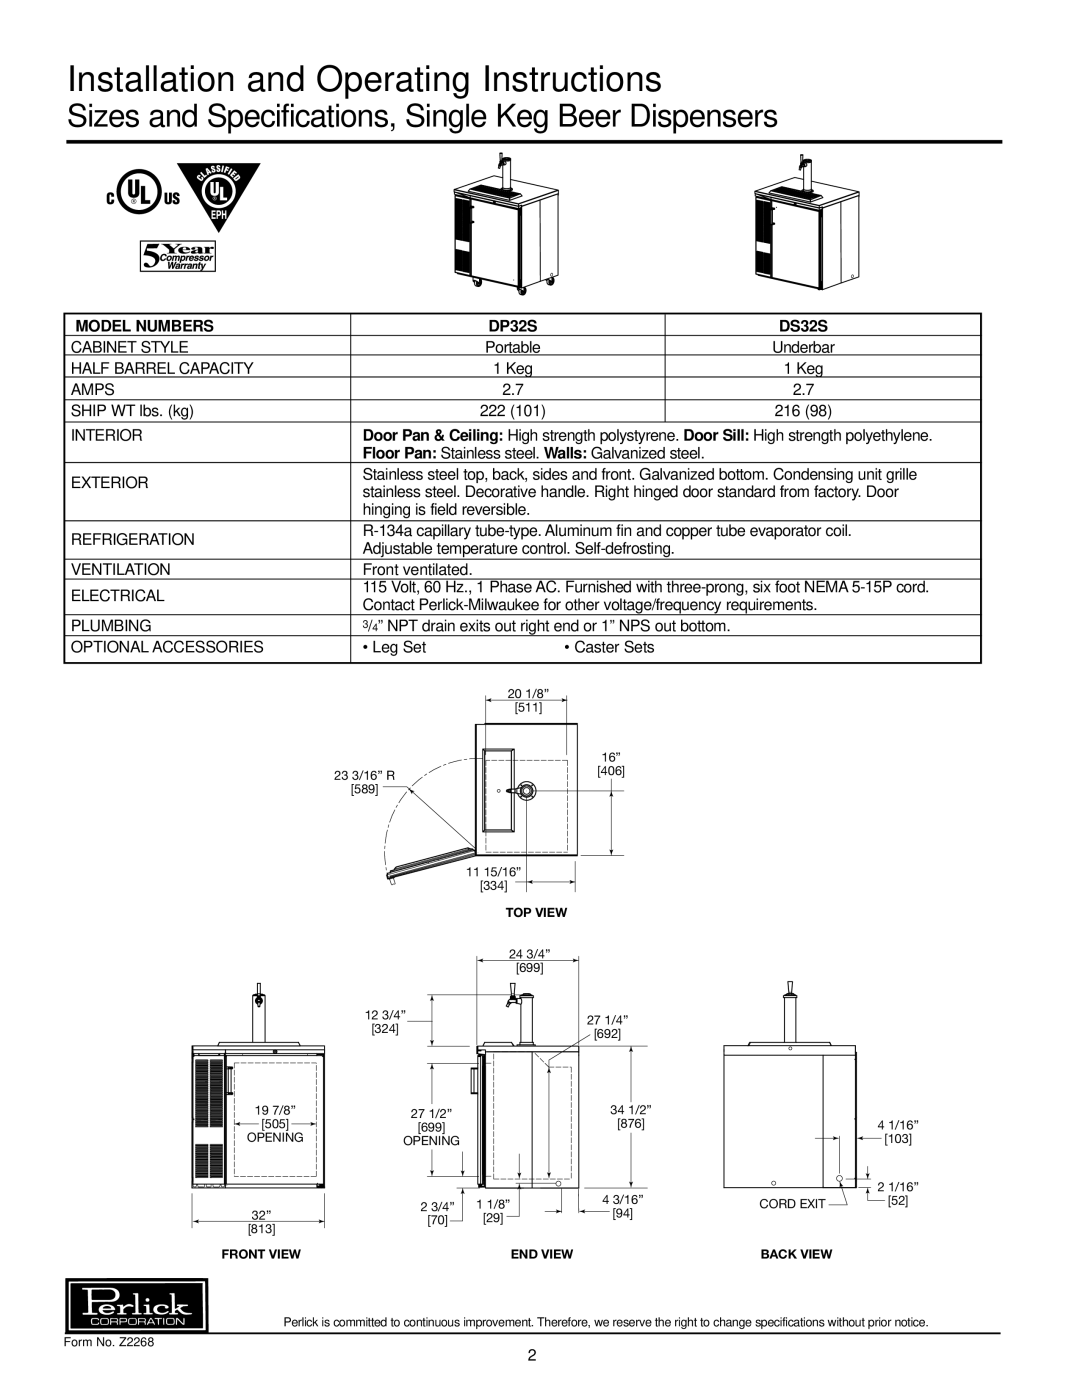 Perlick DP32S Installation and Operating Instructions, Sizes and Specifications, Single Keg Beer Dispensers, Model Numbers 